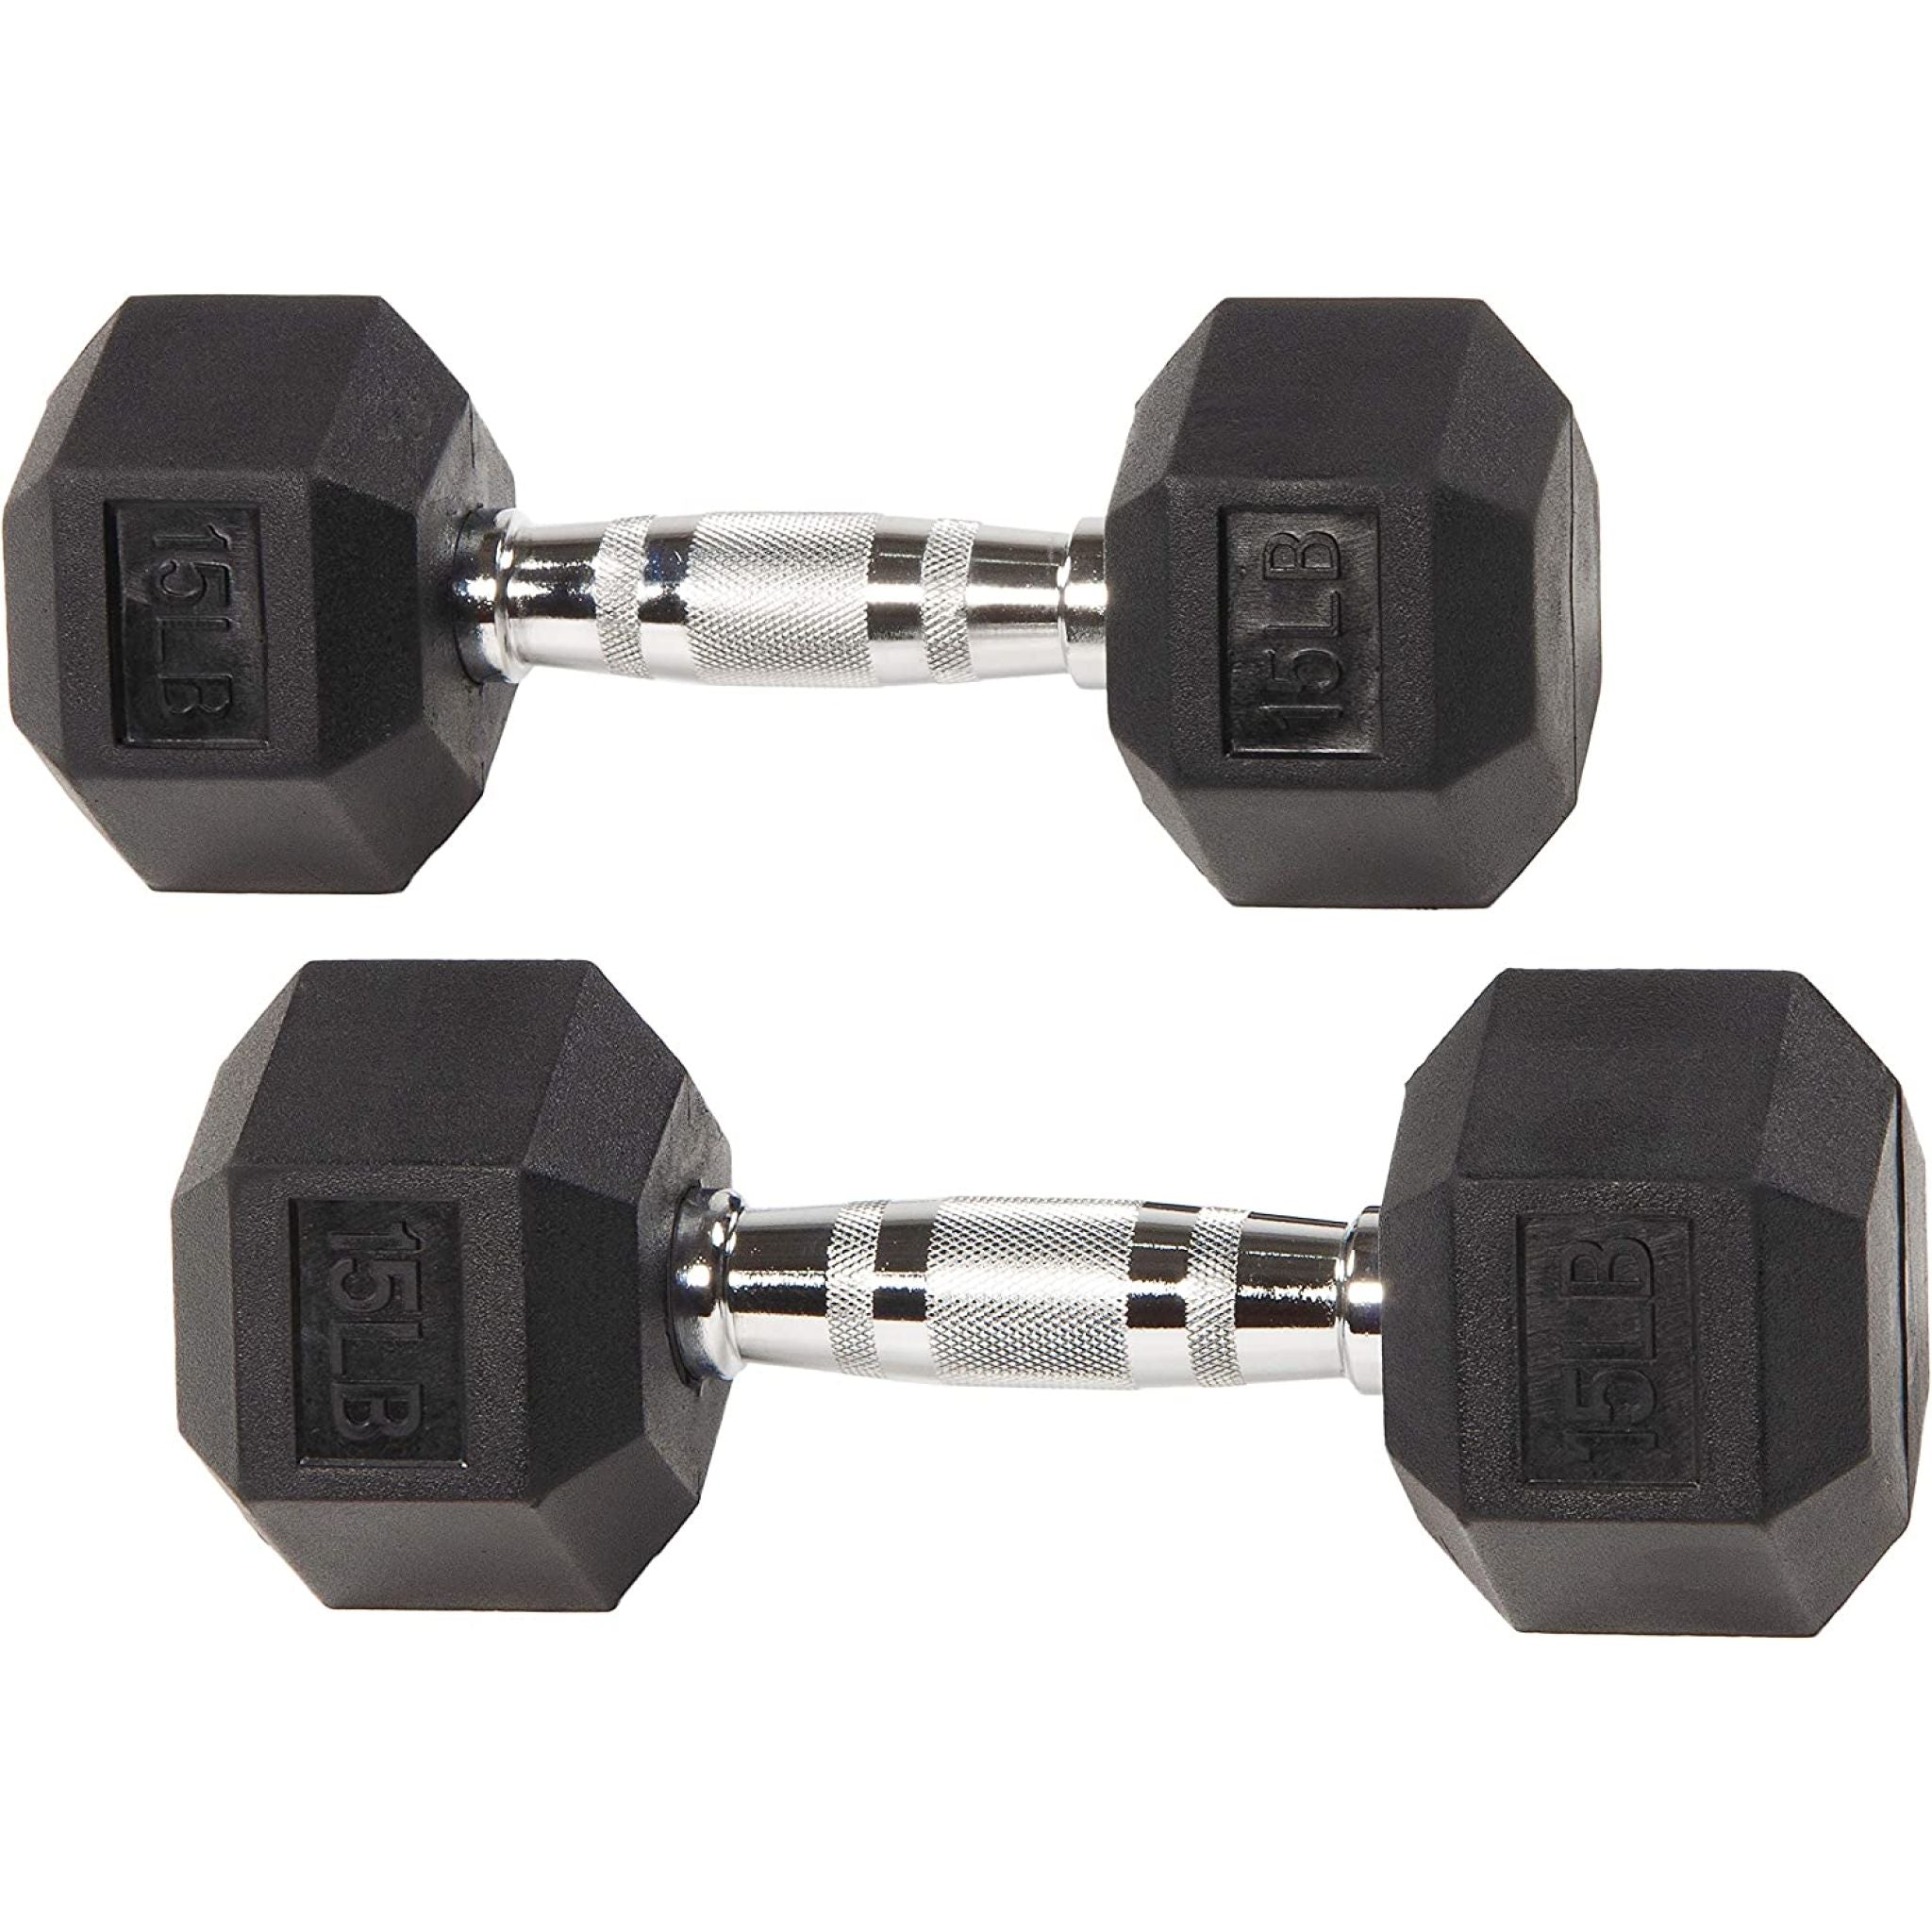 15Lb rubber hex dumbbells pair at Express Gym Supply